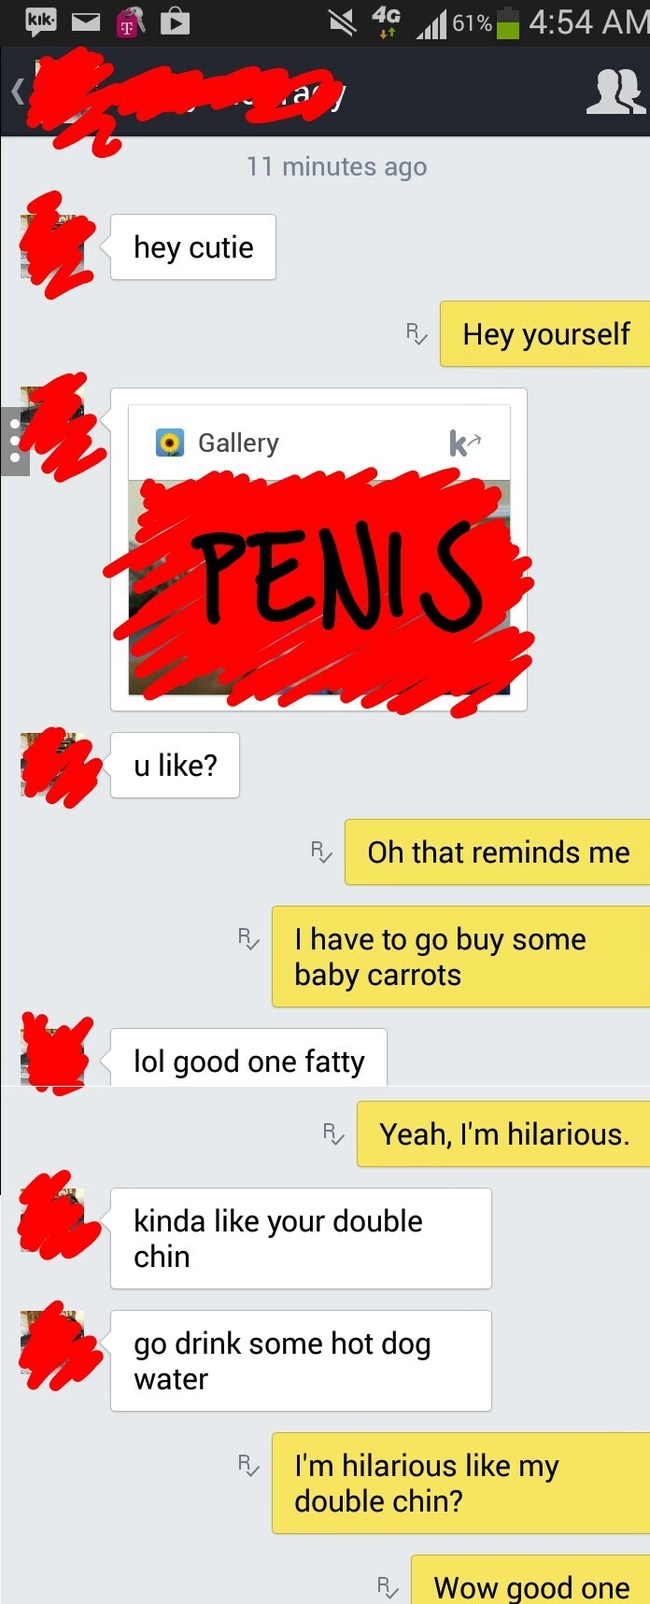 reply to a dick - Kik B 49 1 61% 11 minutes ago hey cutie Hey yourself O Gallery Galleryment Penis u ? R, Oh that reminds me I have to go buy some baby carrots lol good one fatty Yeah, I'm hilarious. kinda your double chin go drink some hot dog water Ry I